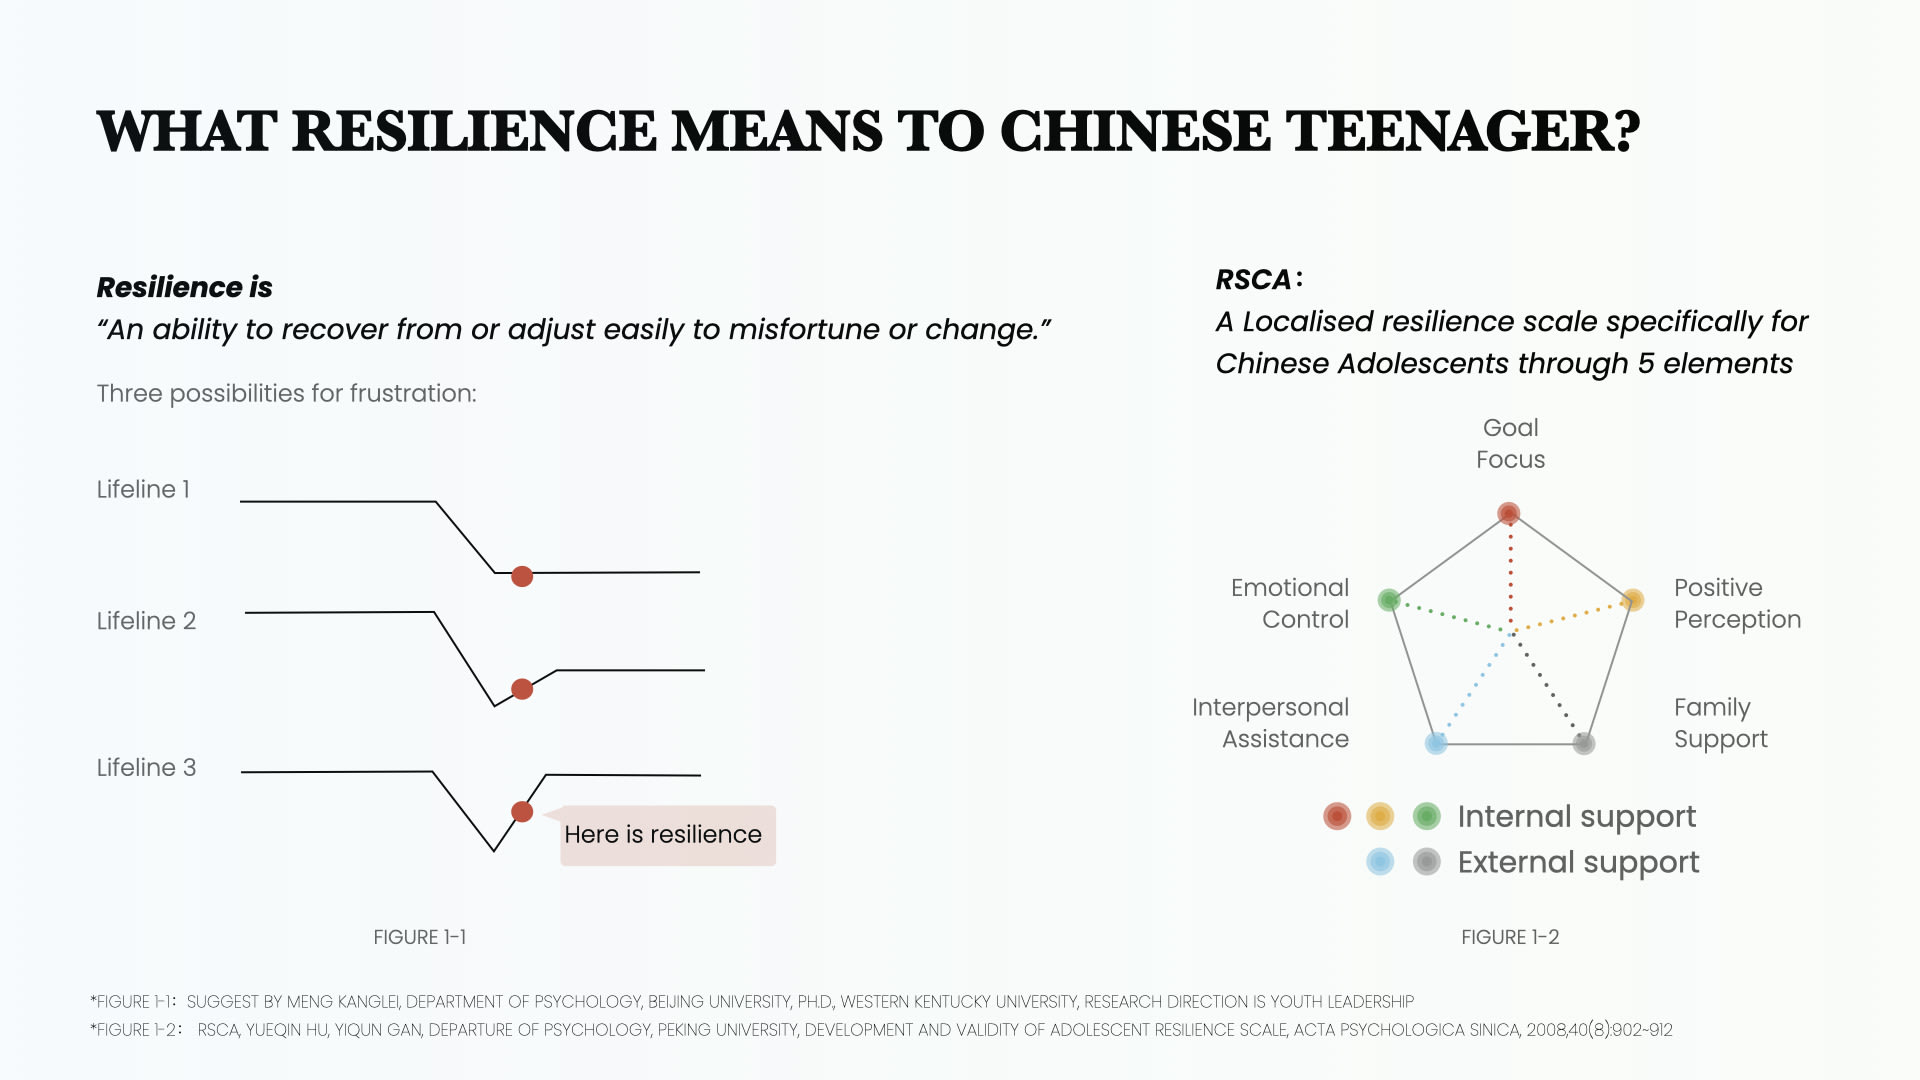 Resilience for Chinese Youth